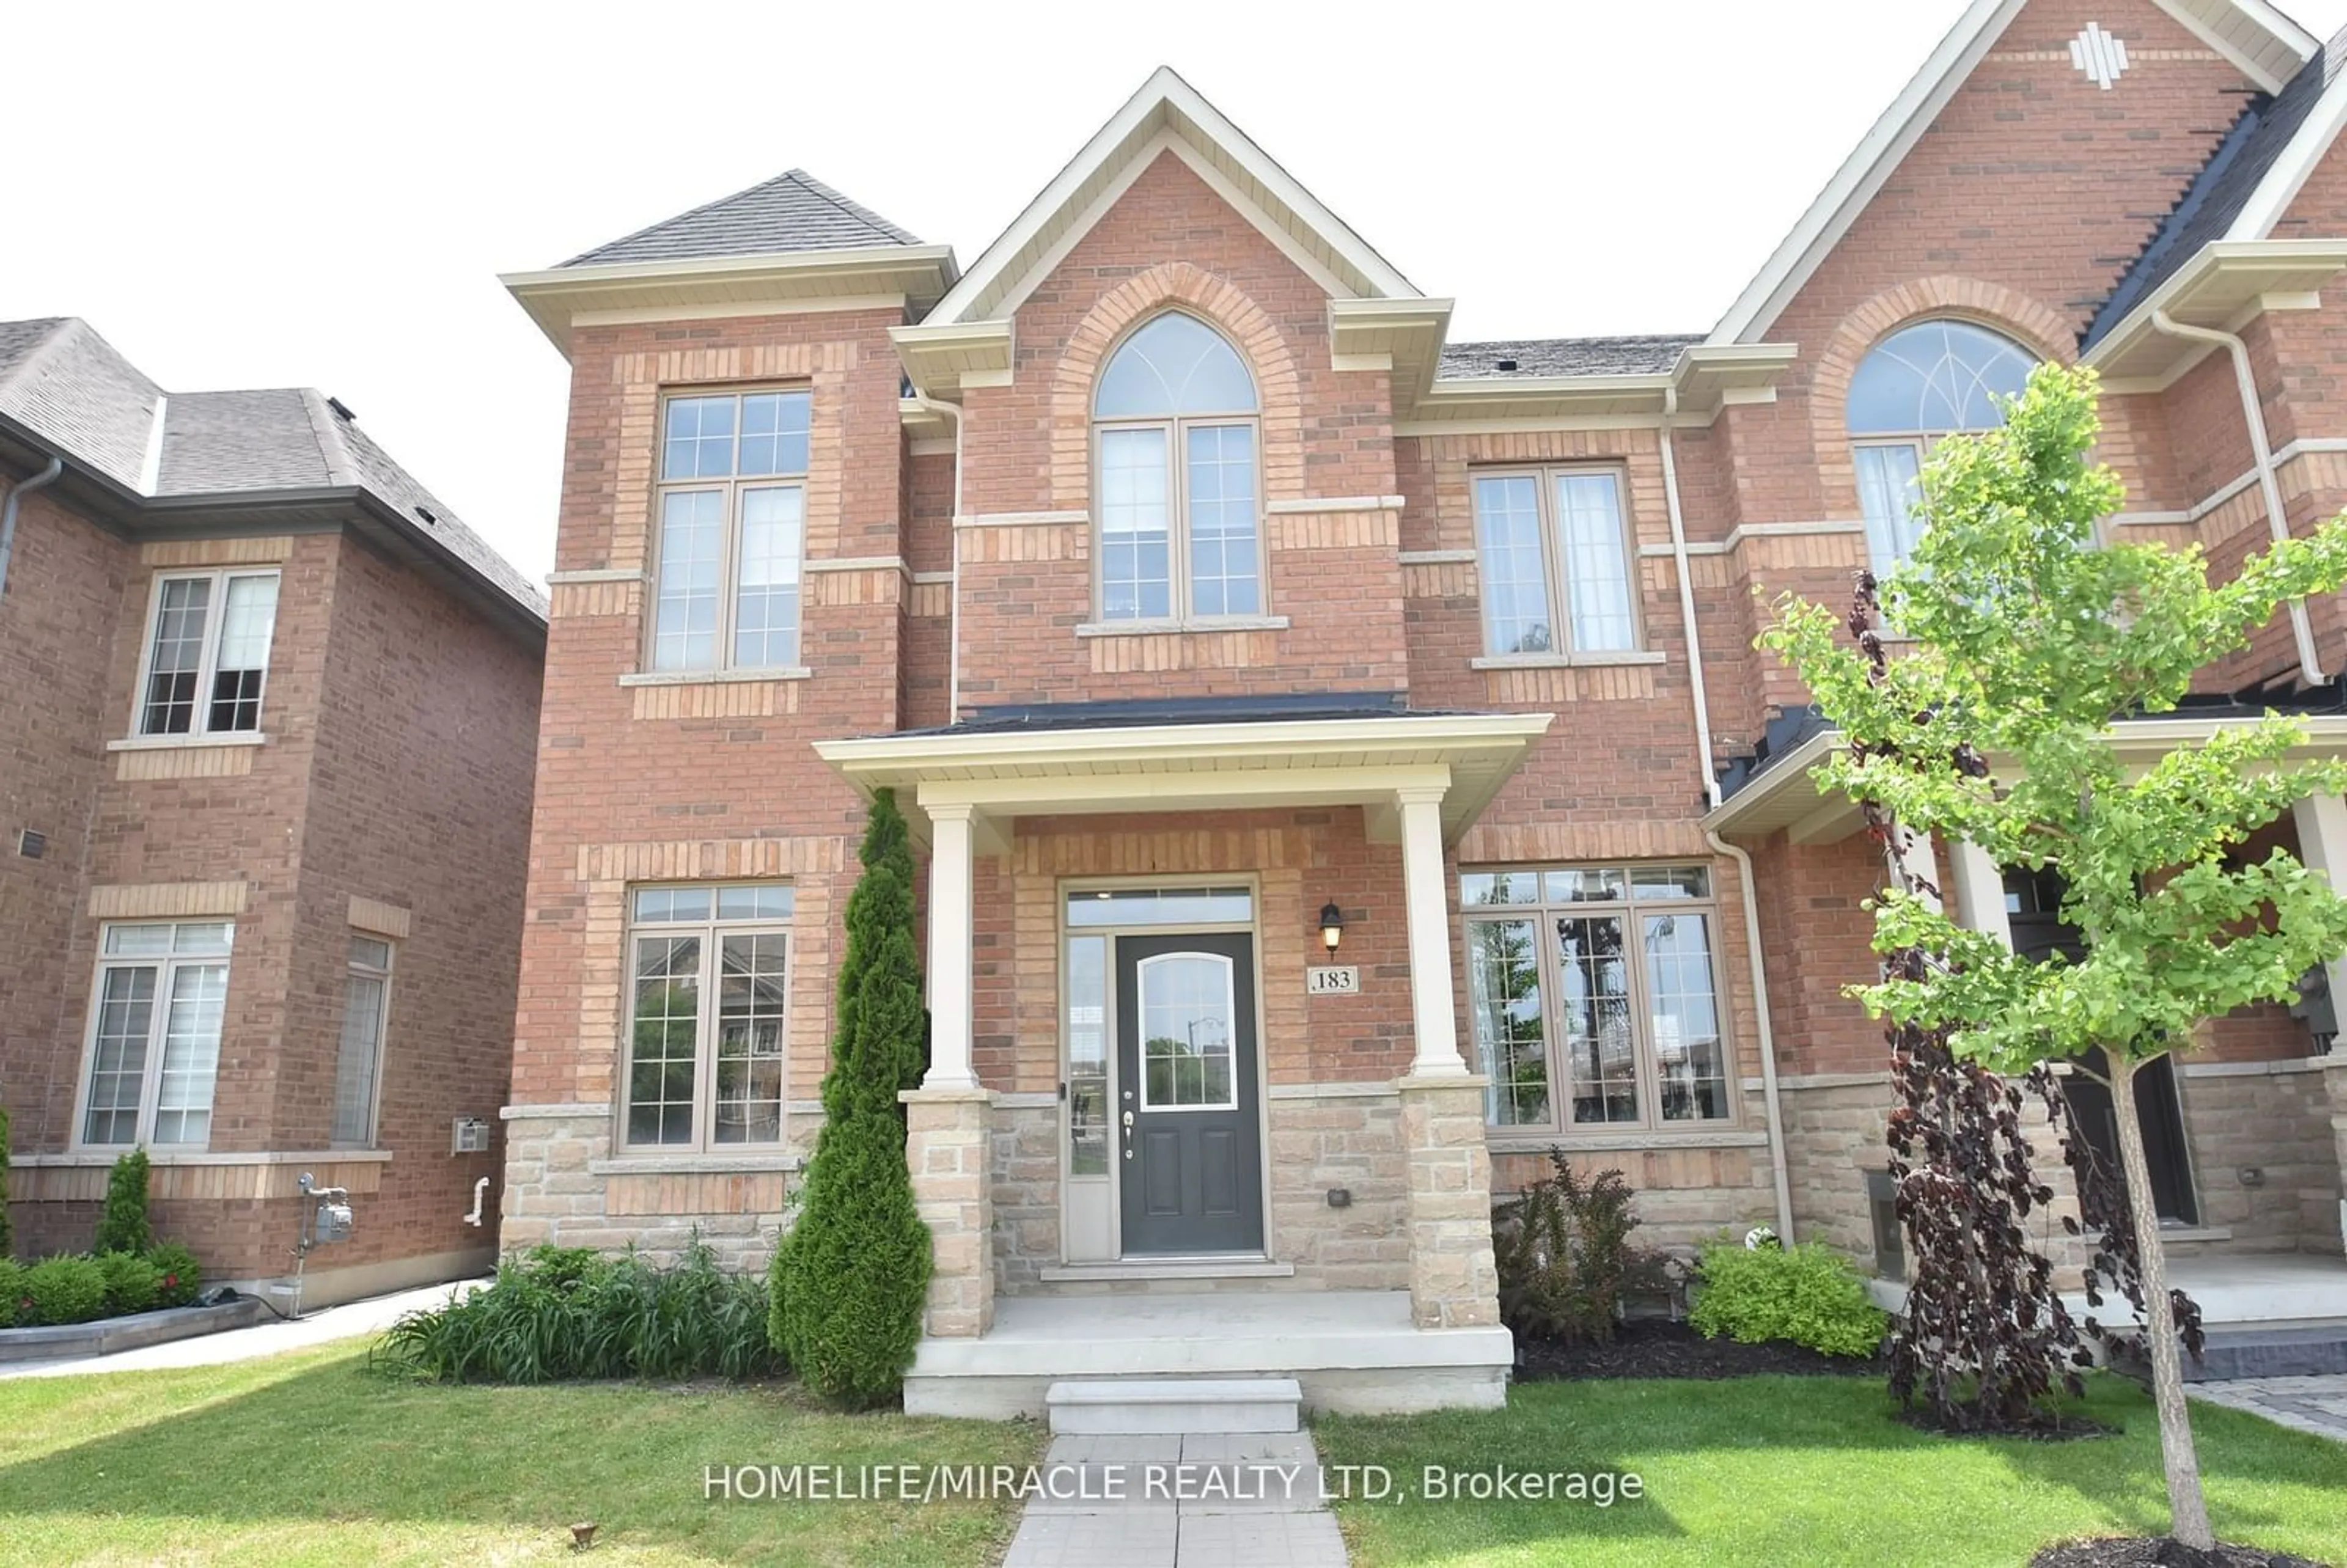 Home with brick exterior material for 183 East Corners Blvd, Vaughan Ontario L4H 3Z9